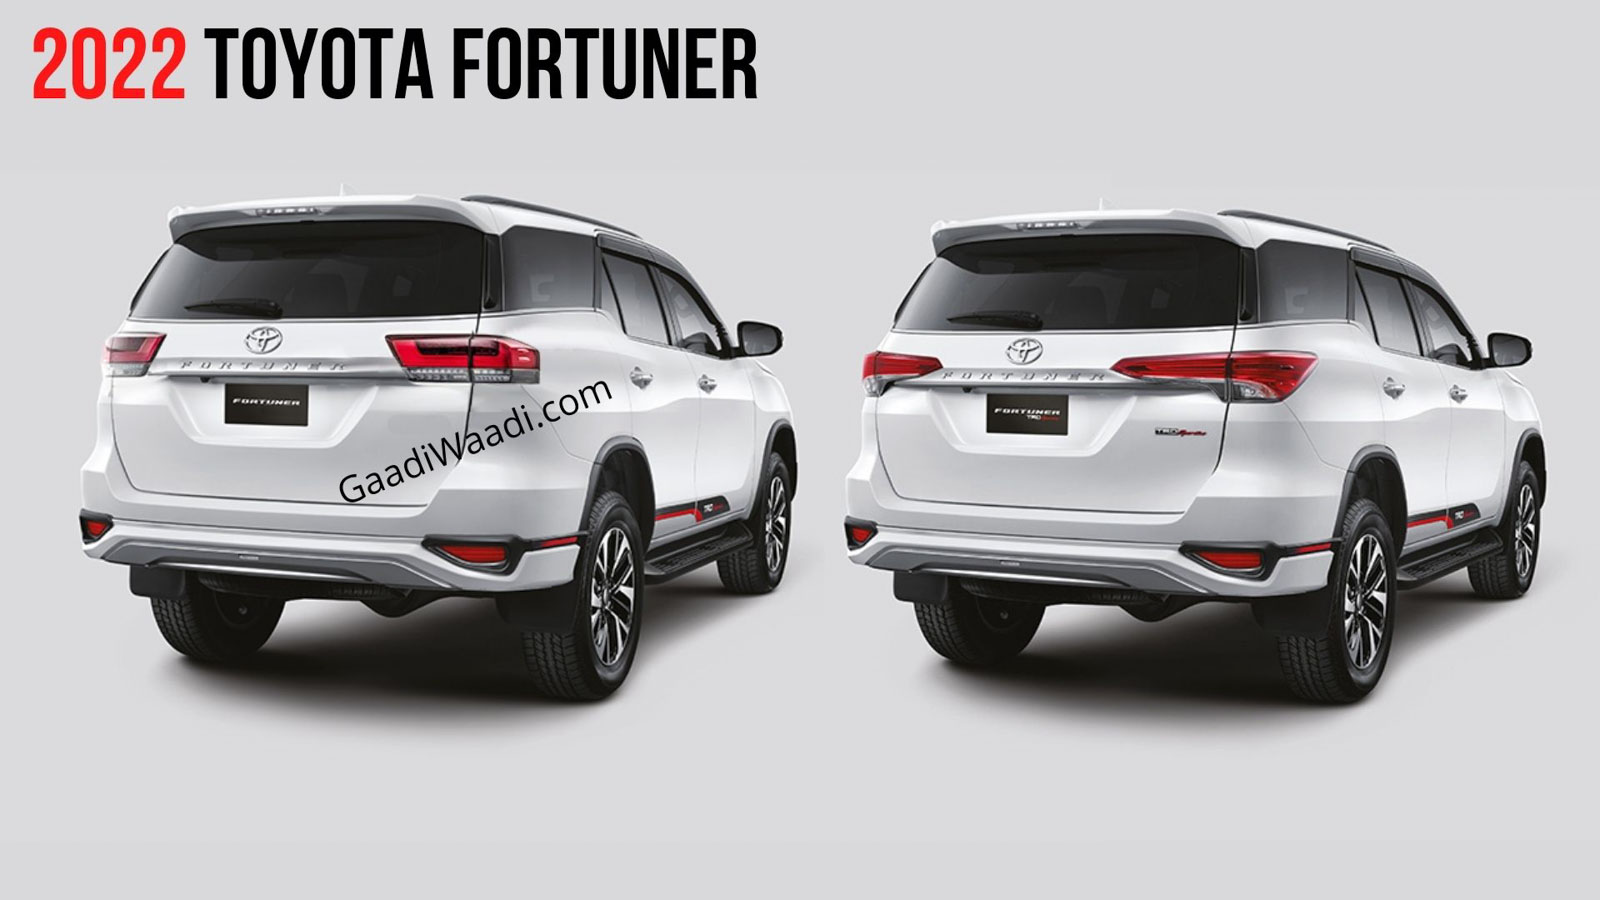 2022 Toyota Fortuner Rendered With LC300 Inspired Design